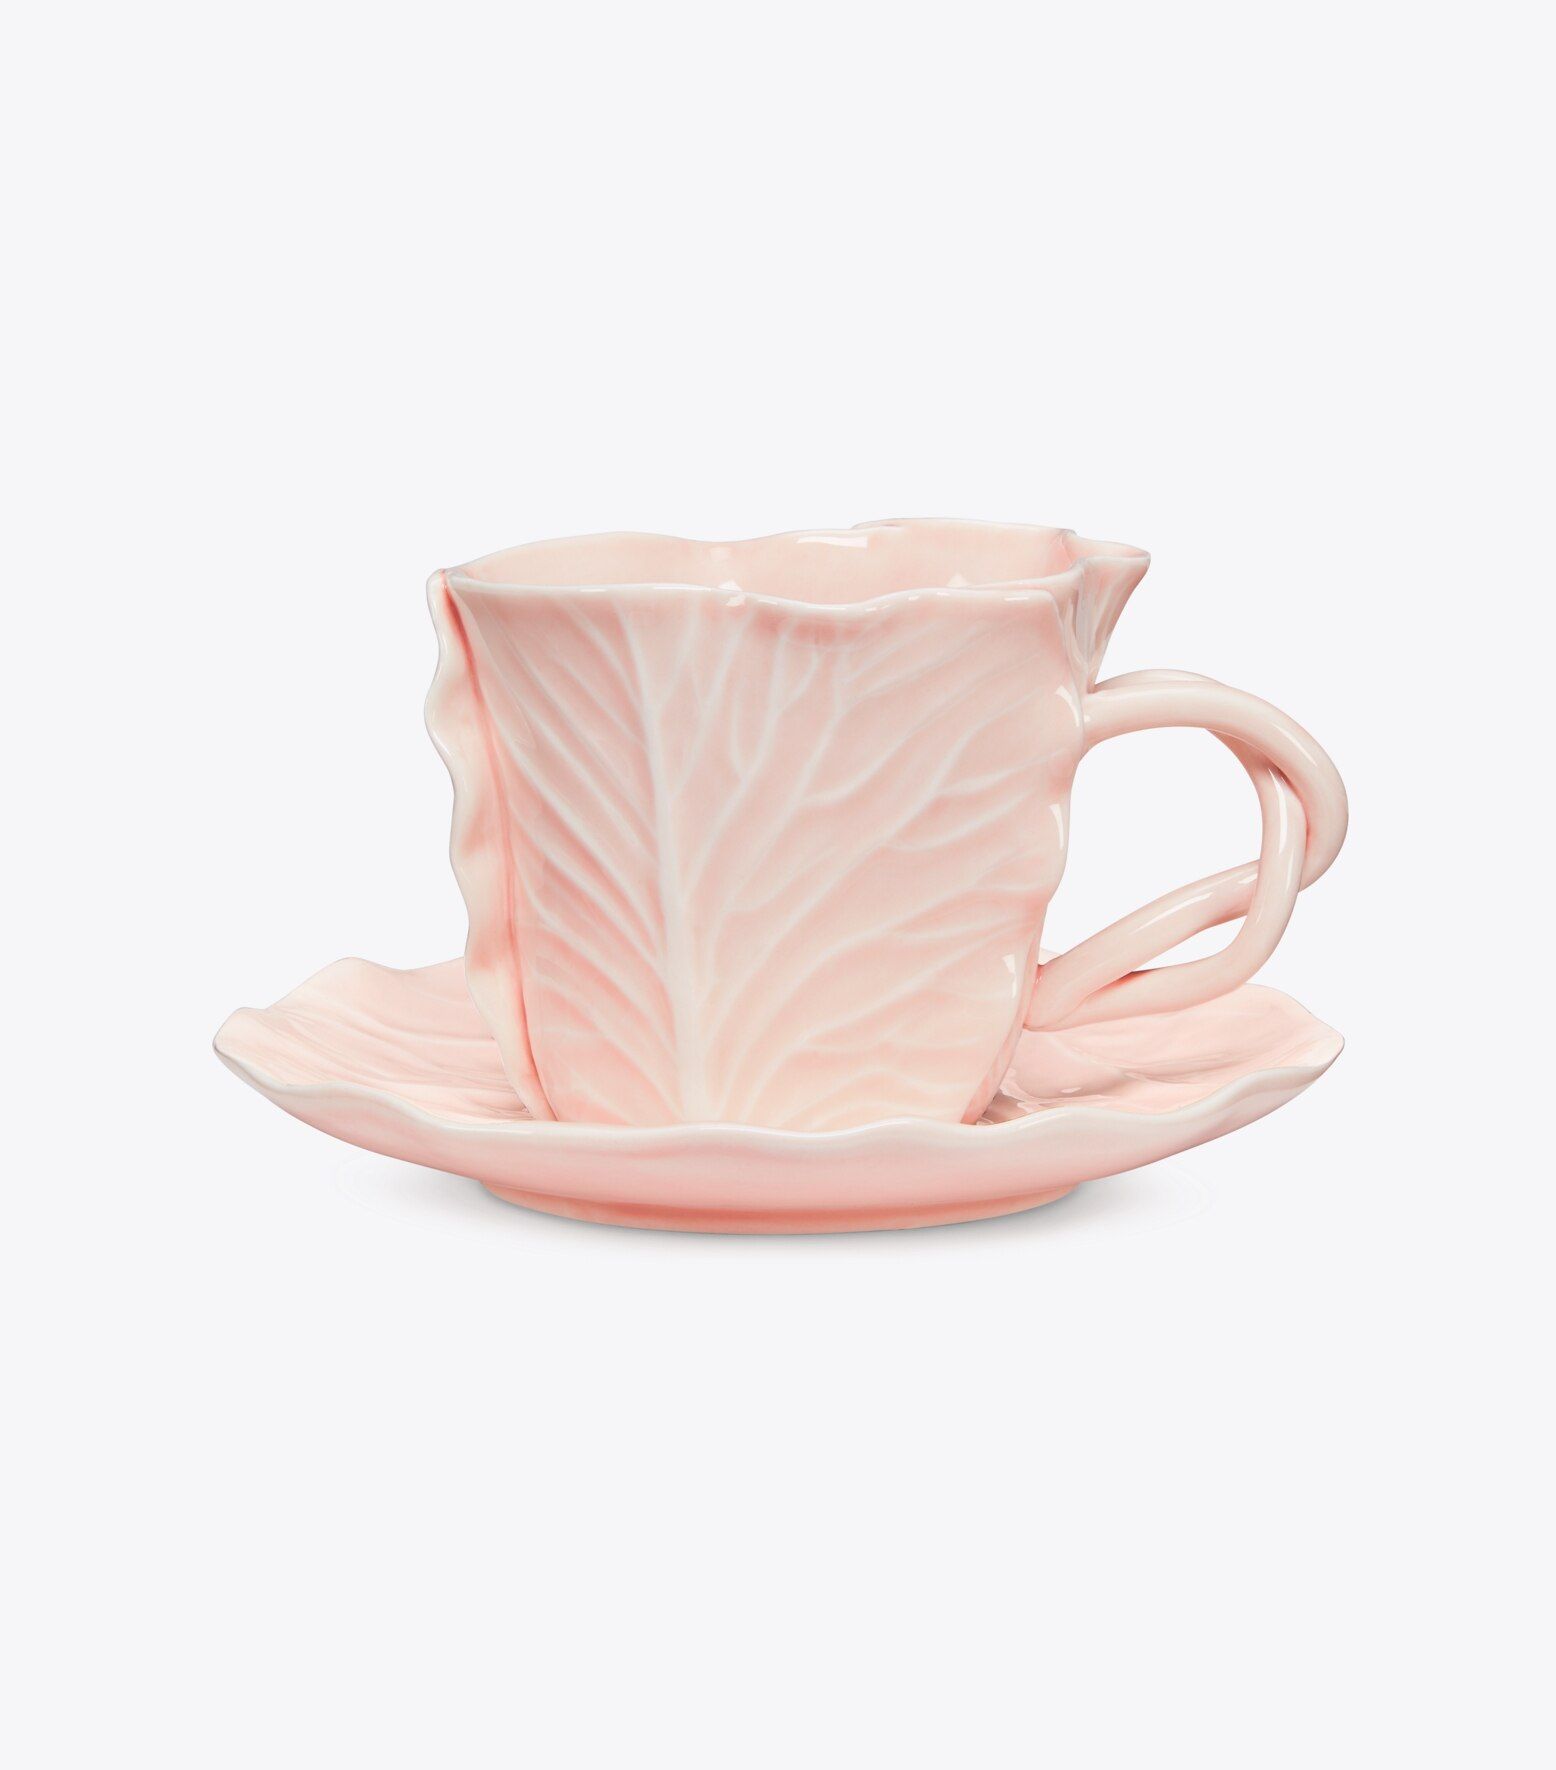 LETTUCE WARE CUP AND SAUCER SET OF TWO | Tory Burch (US)